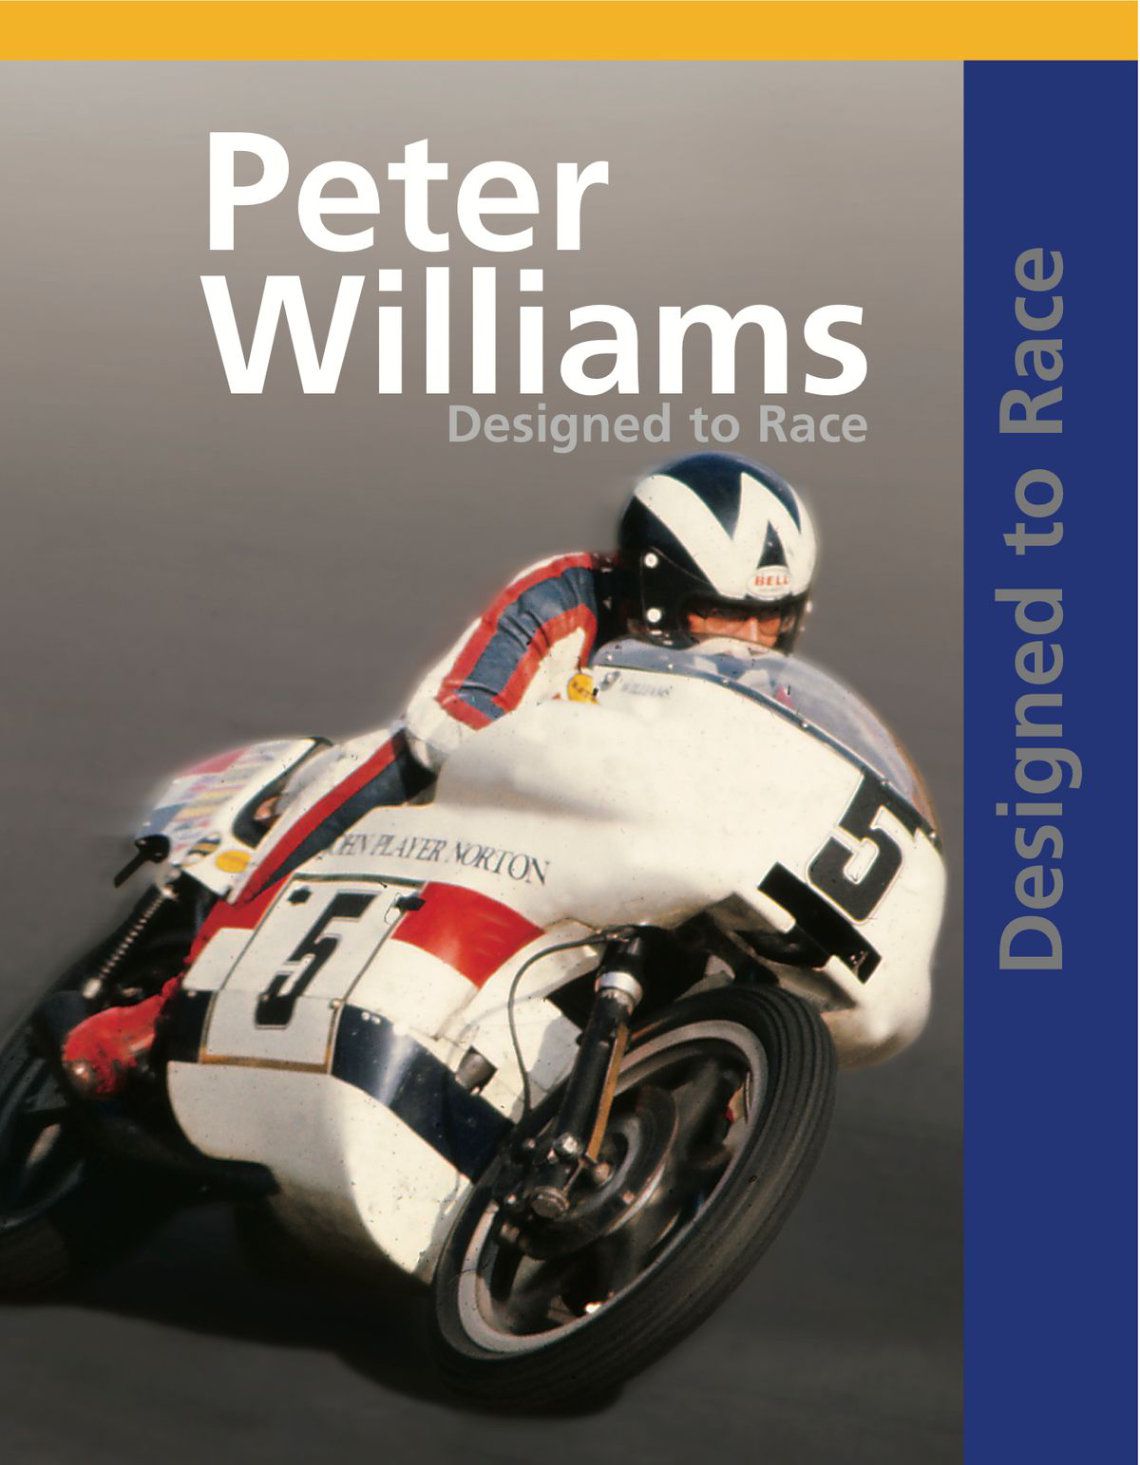 DESIGNED TO RACE by Peter Williams